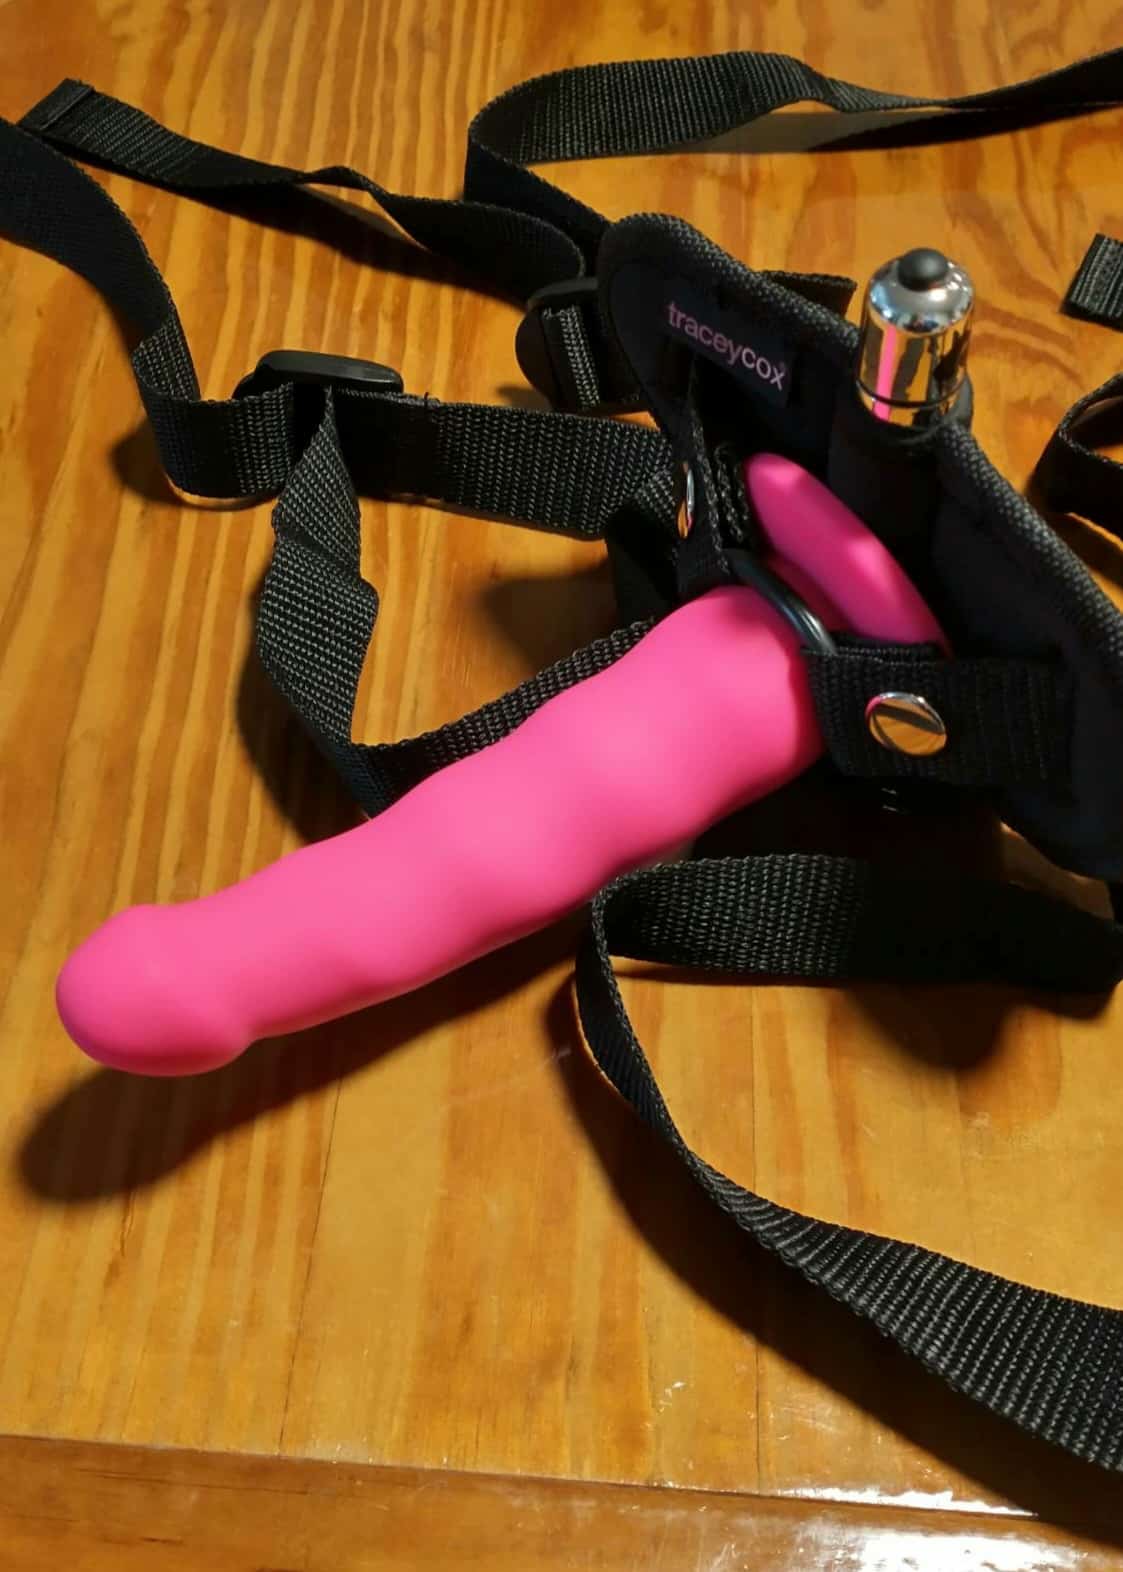 Tracey Cox Supersex Strap-On Pegging Kit. Slide 9